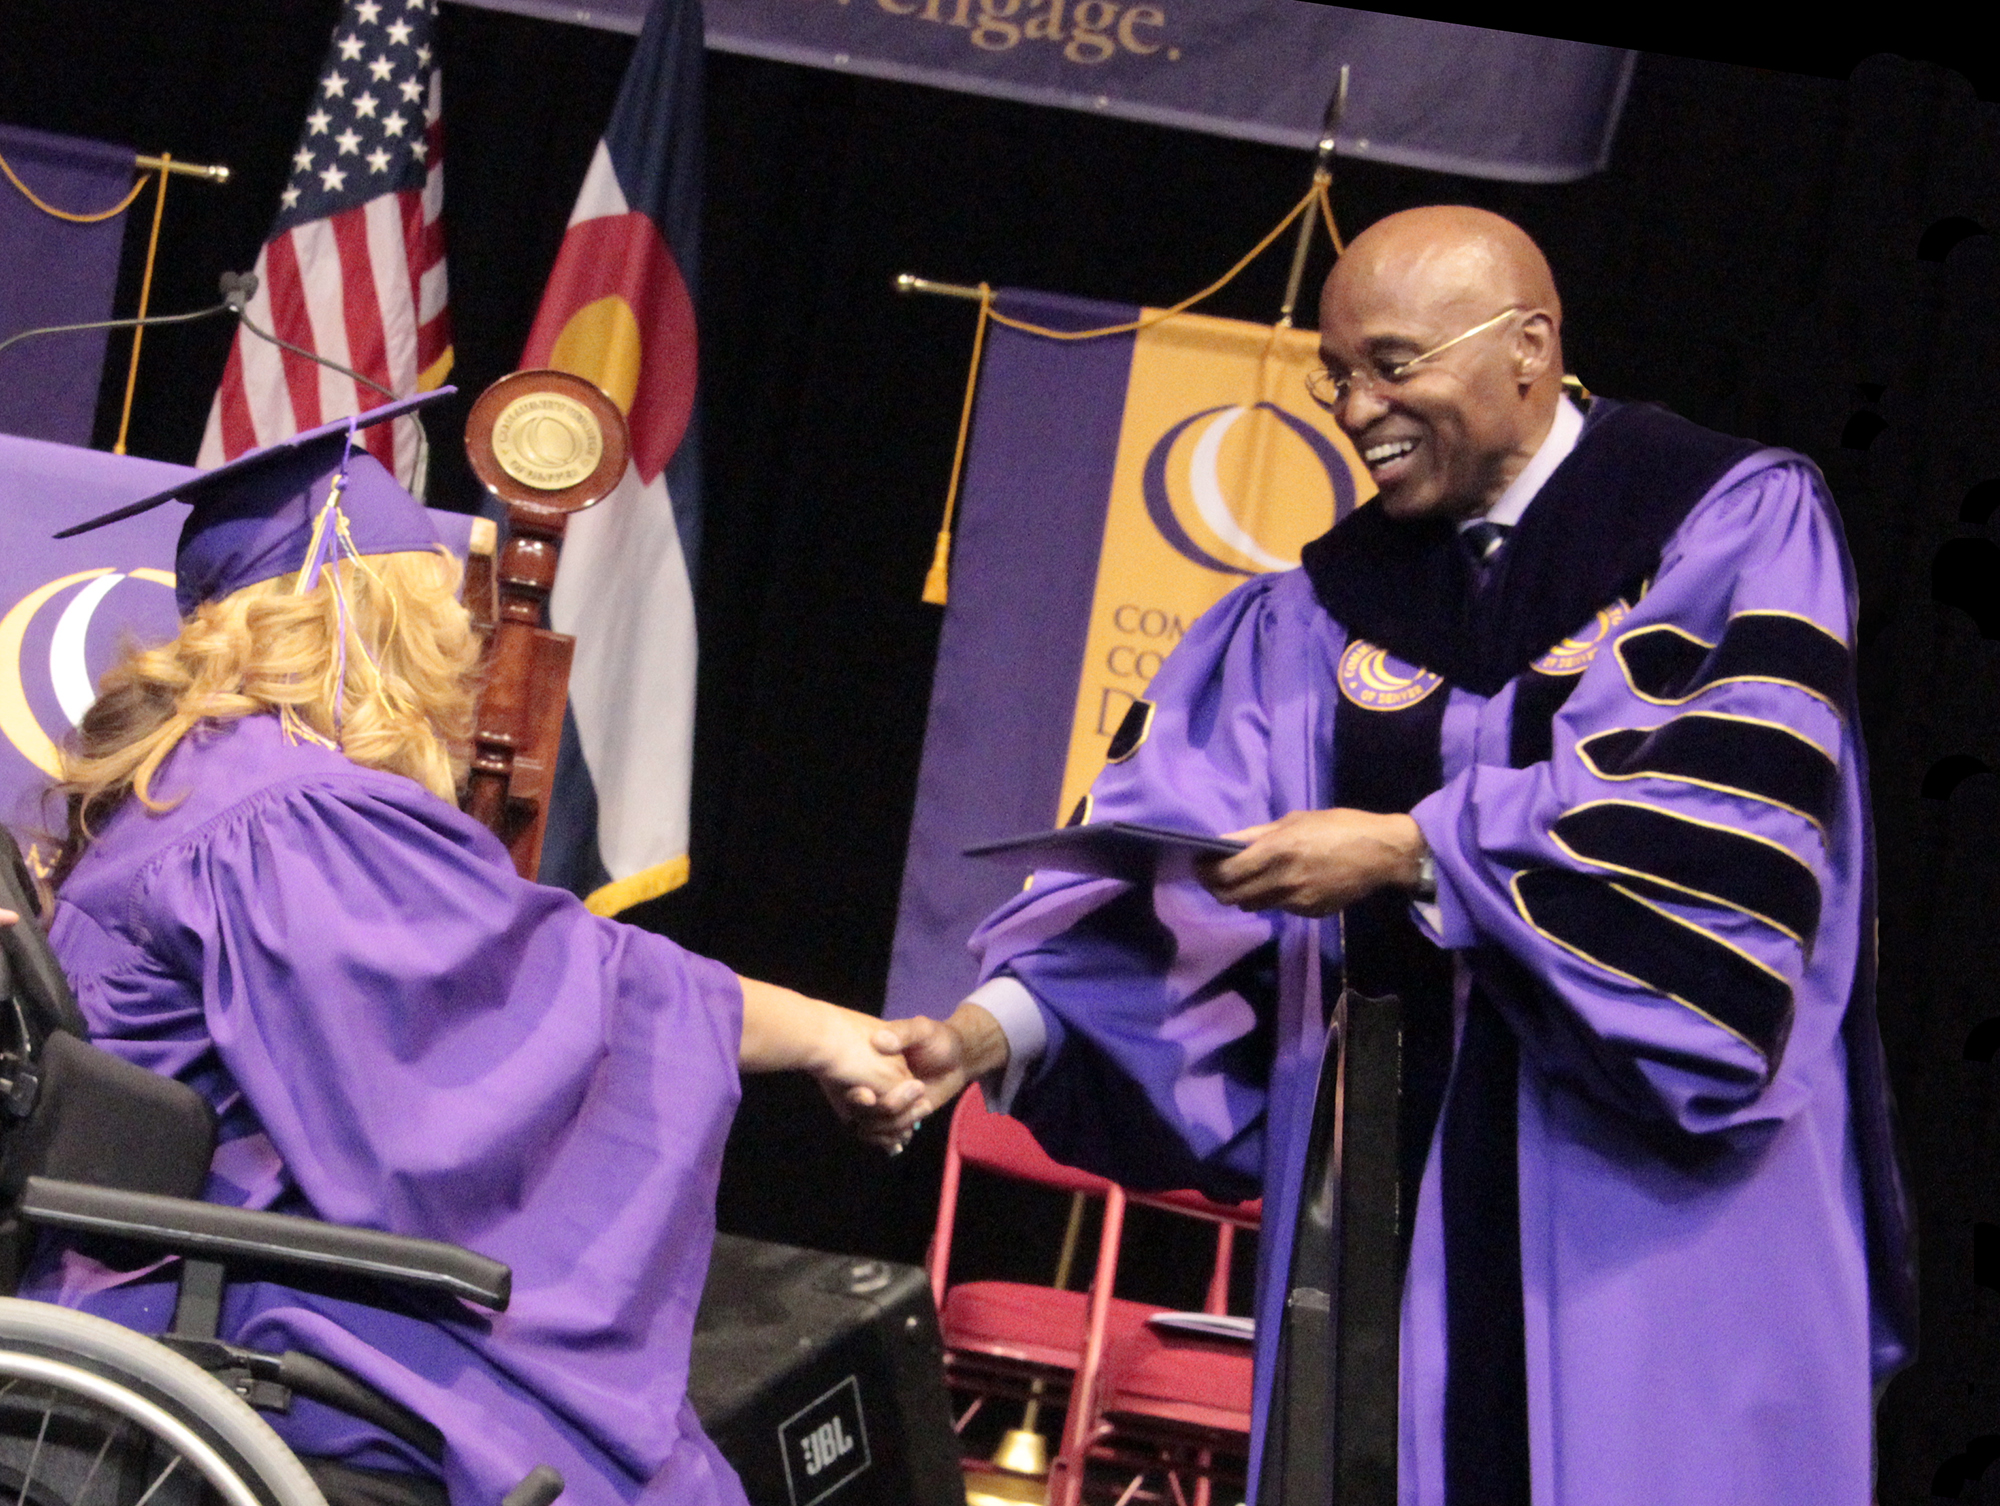 2014 female graduate in wheelchair receiving her diploma from CCD president Everette Freeman